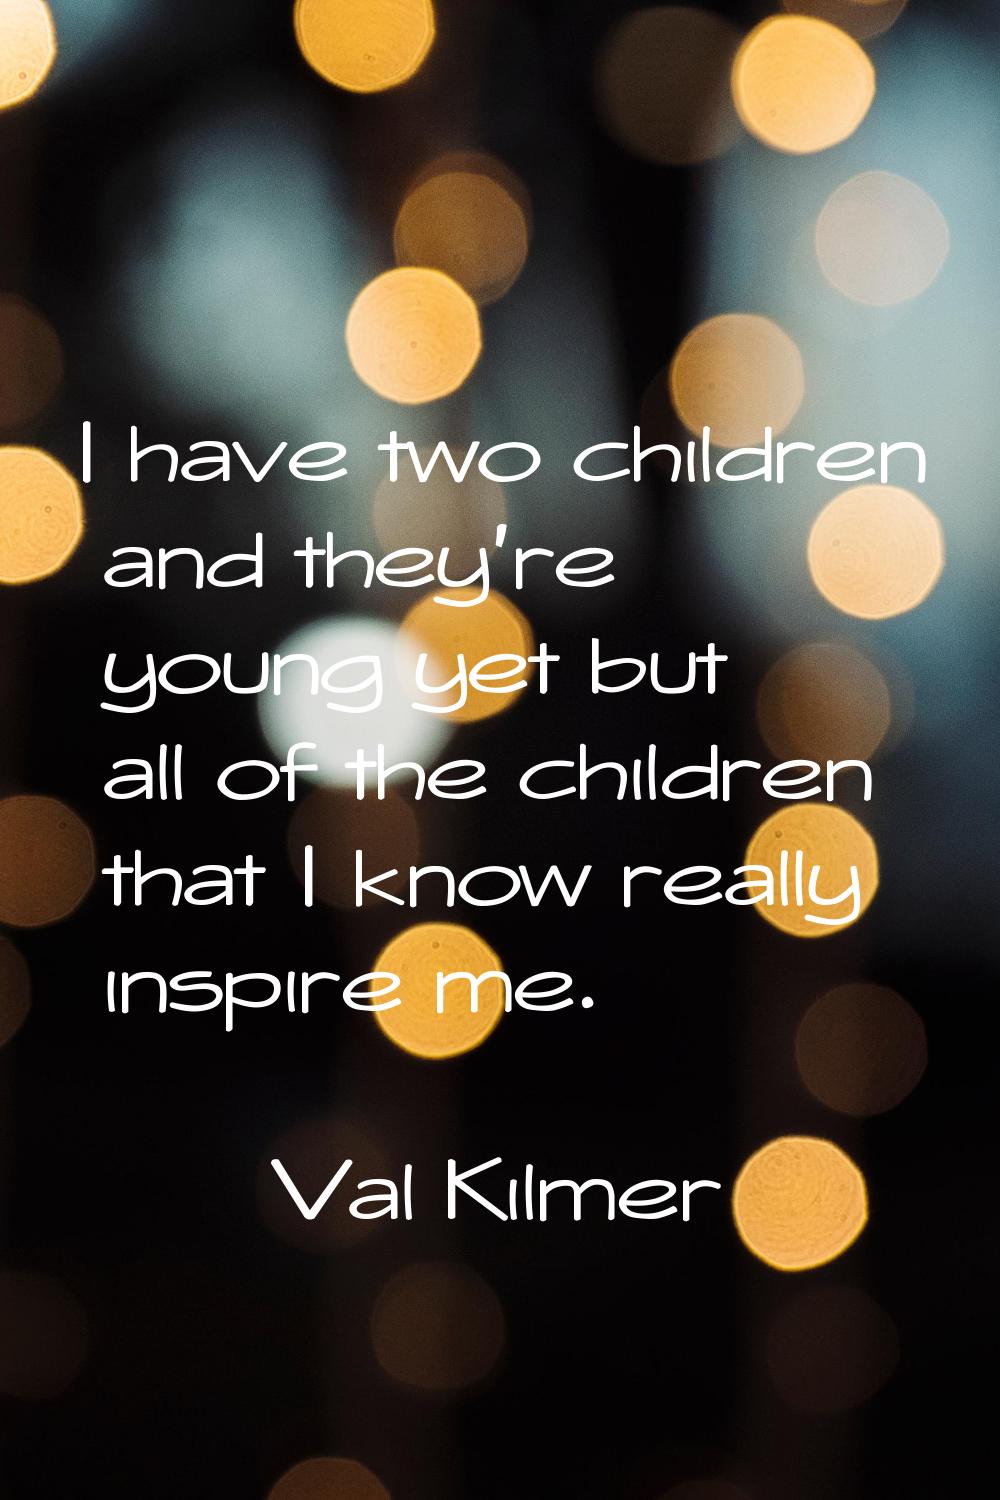 I have two children and they're young yet but all of the children that I know really inspire me.